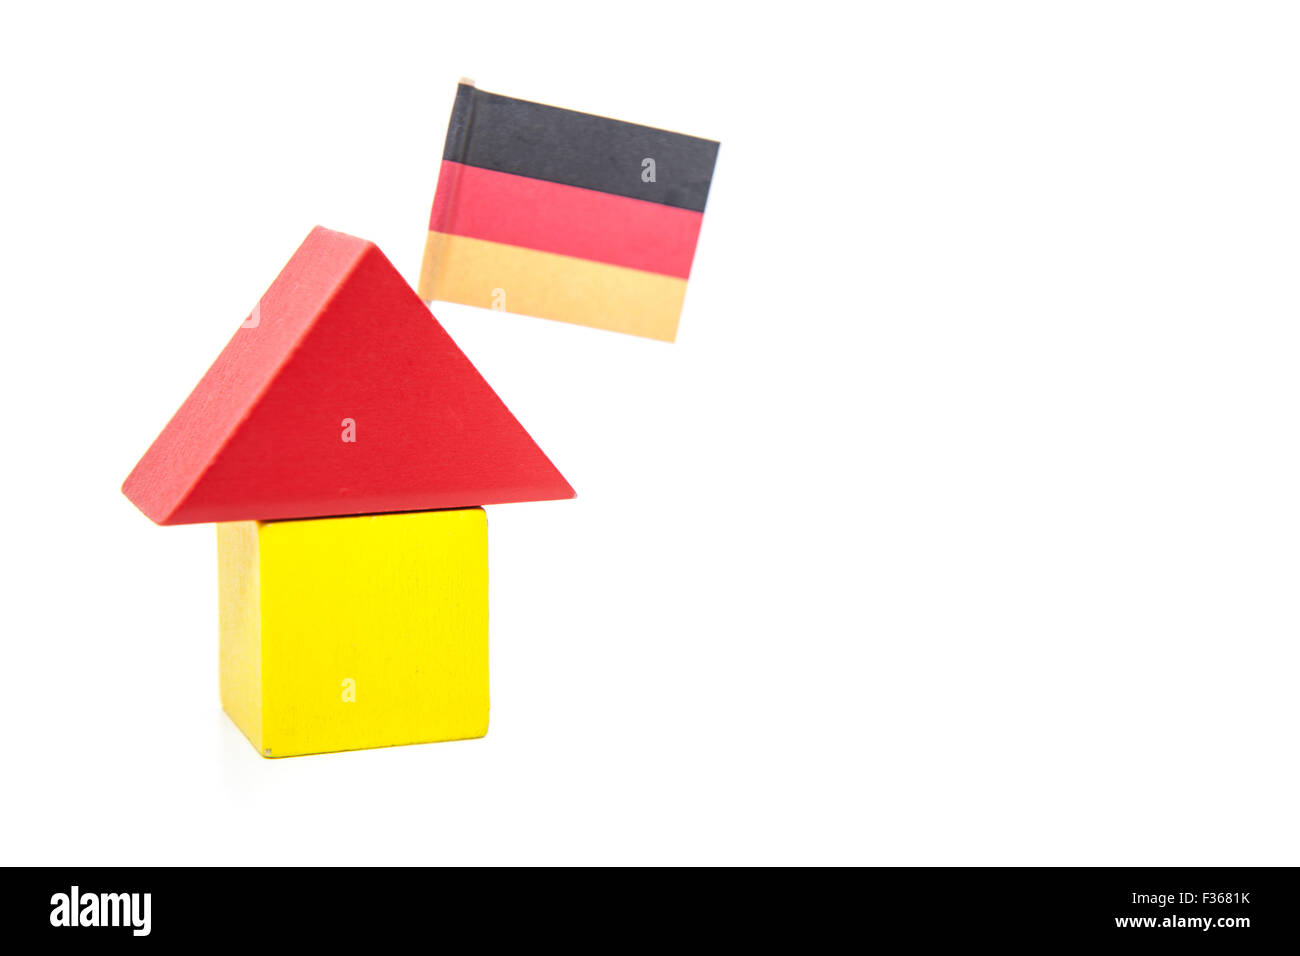 Stylized home with german flag. All on white background. Stock Photo